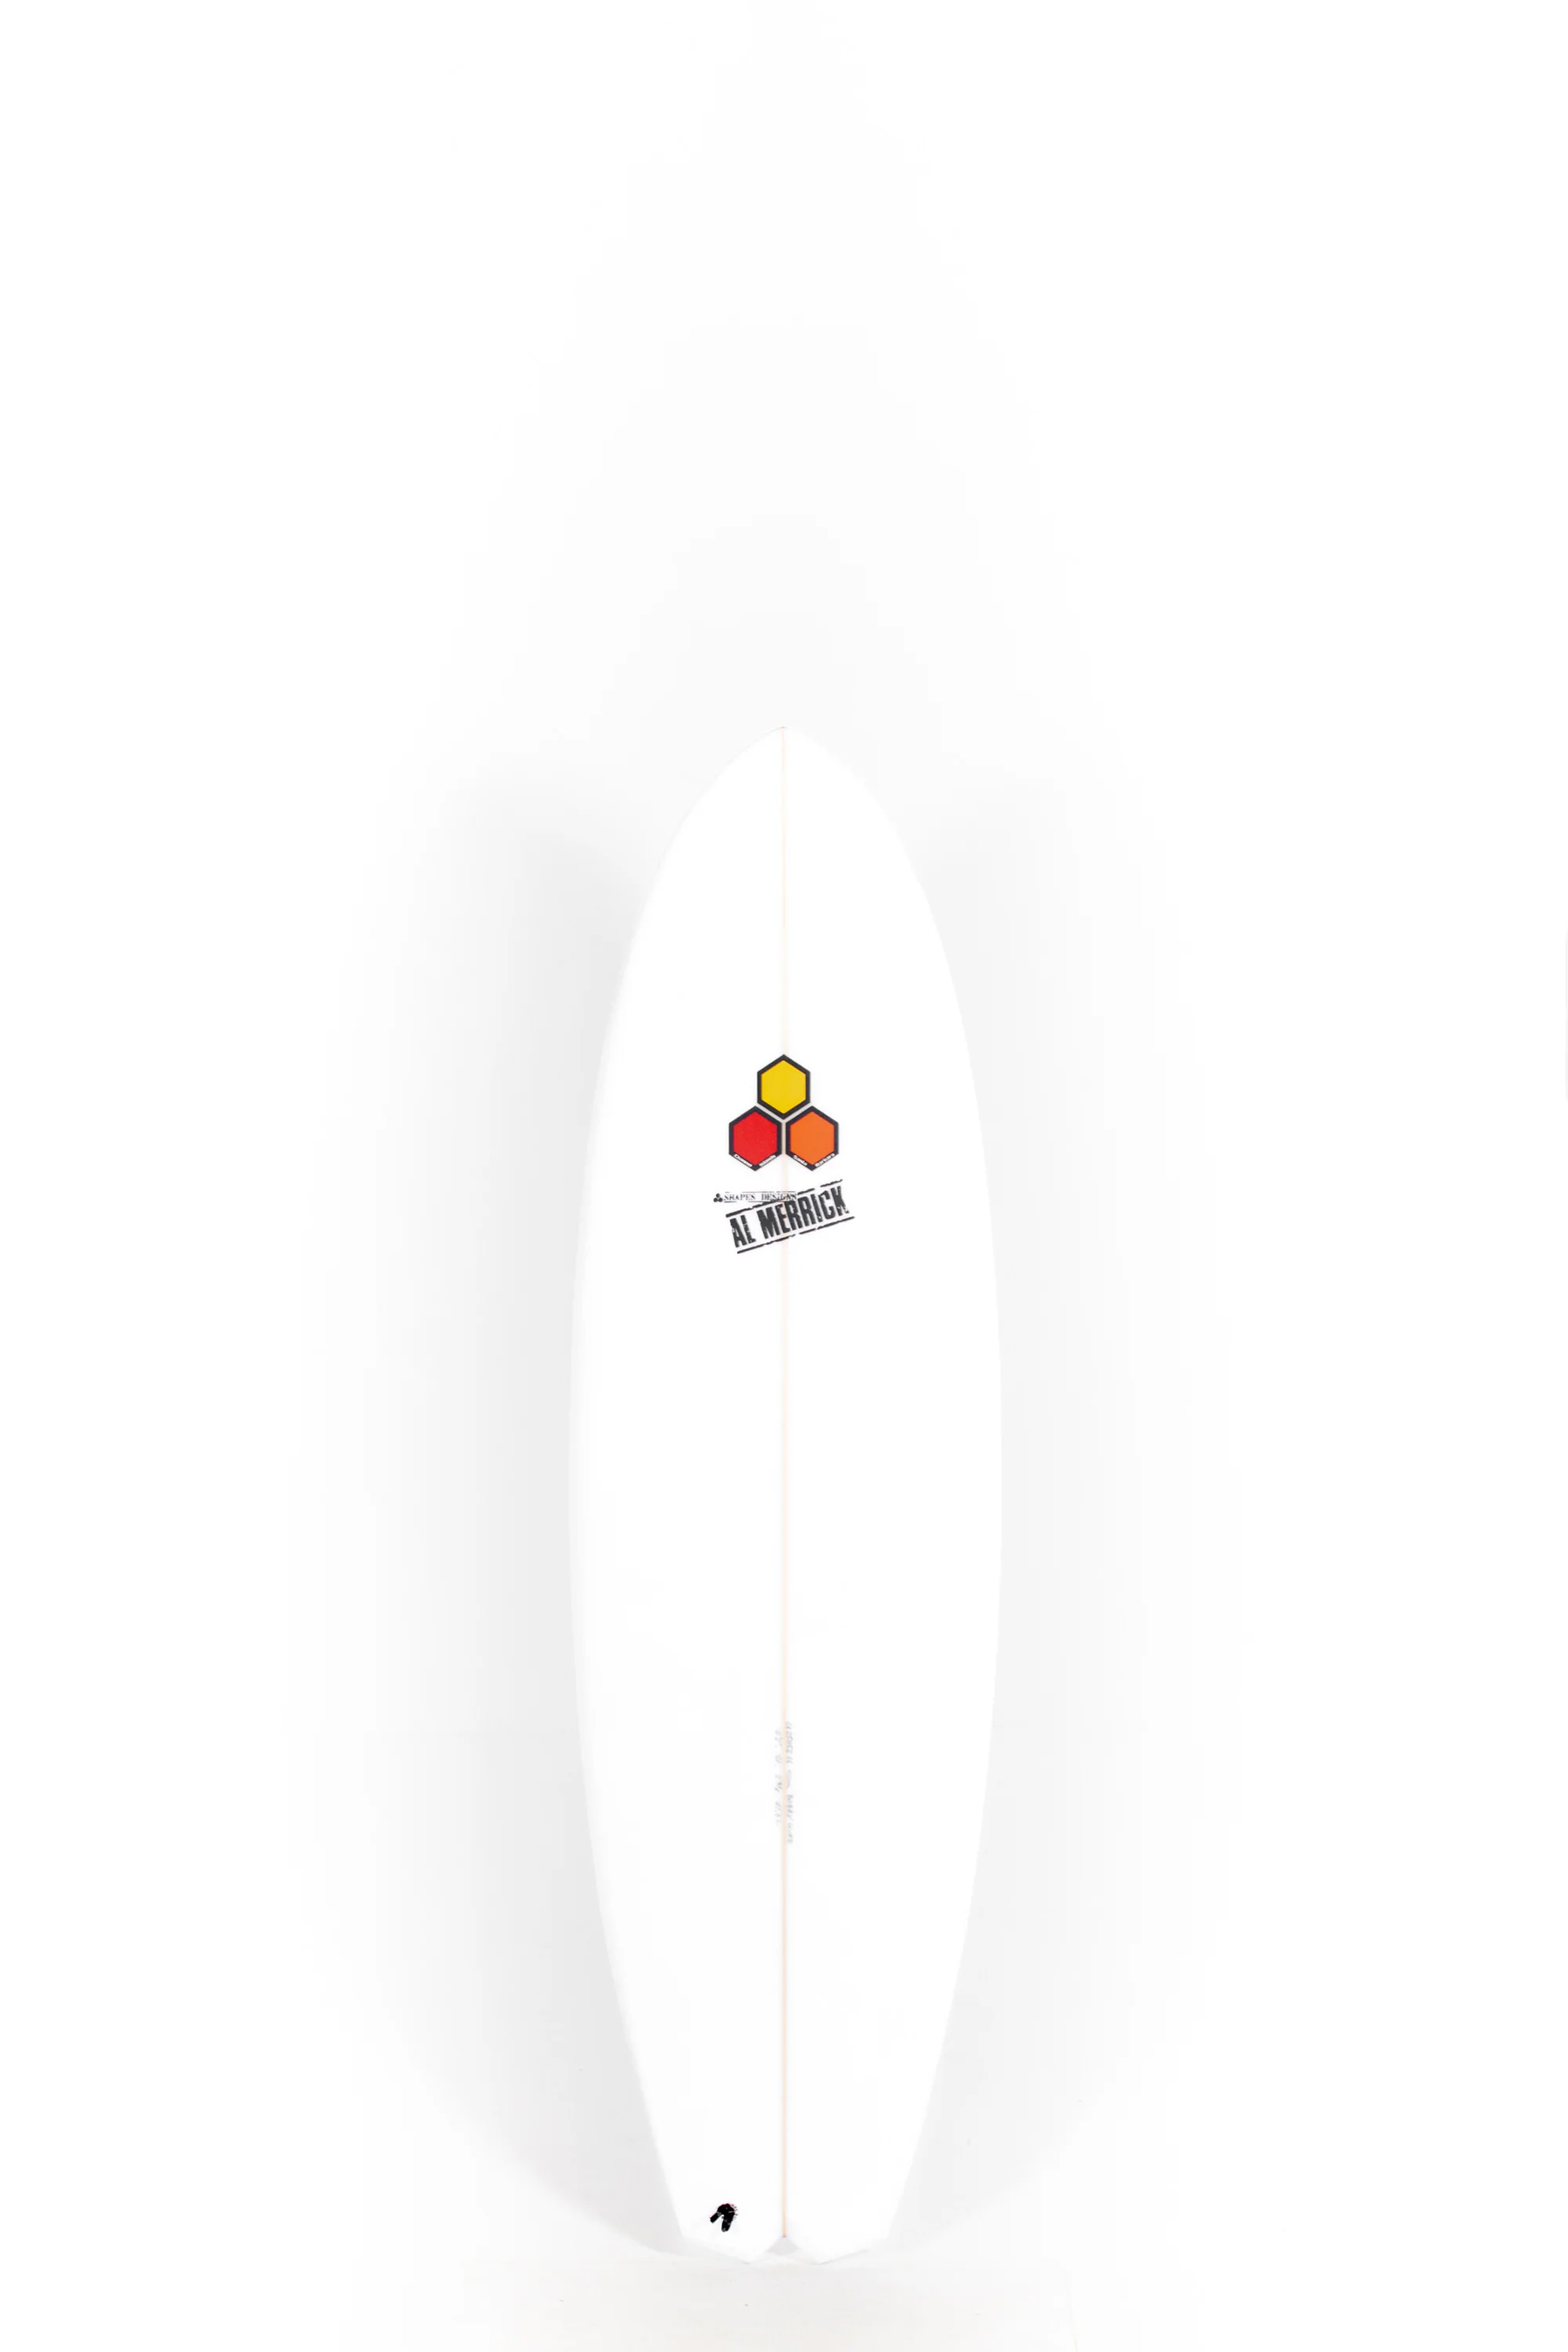 Channel Islands - BOBBY QUAD 6'0